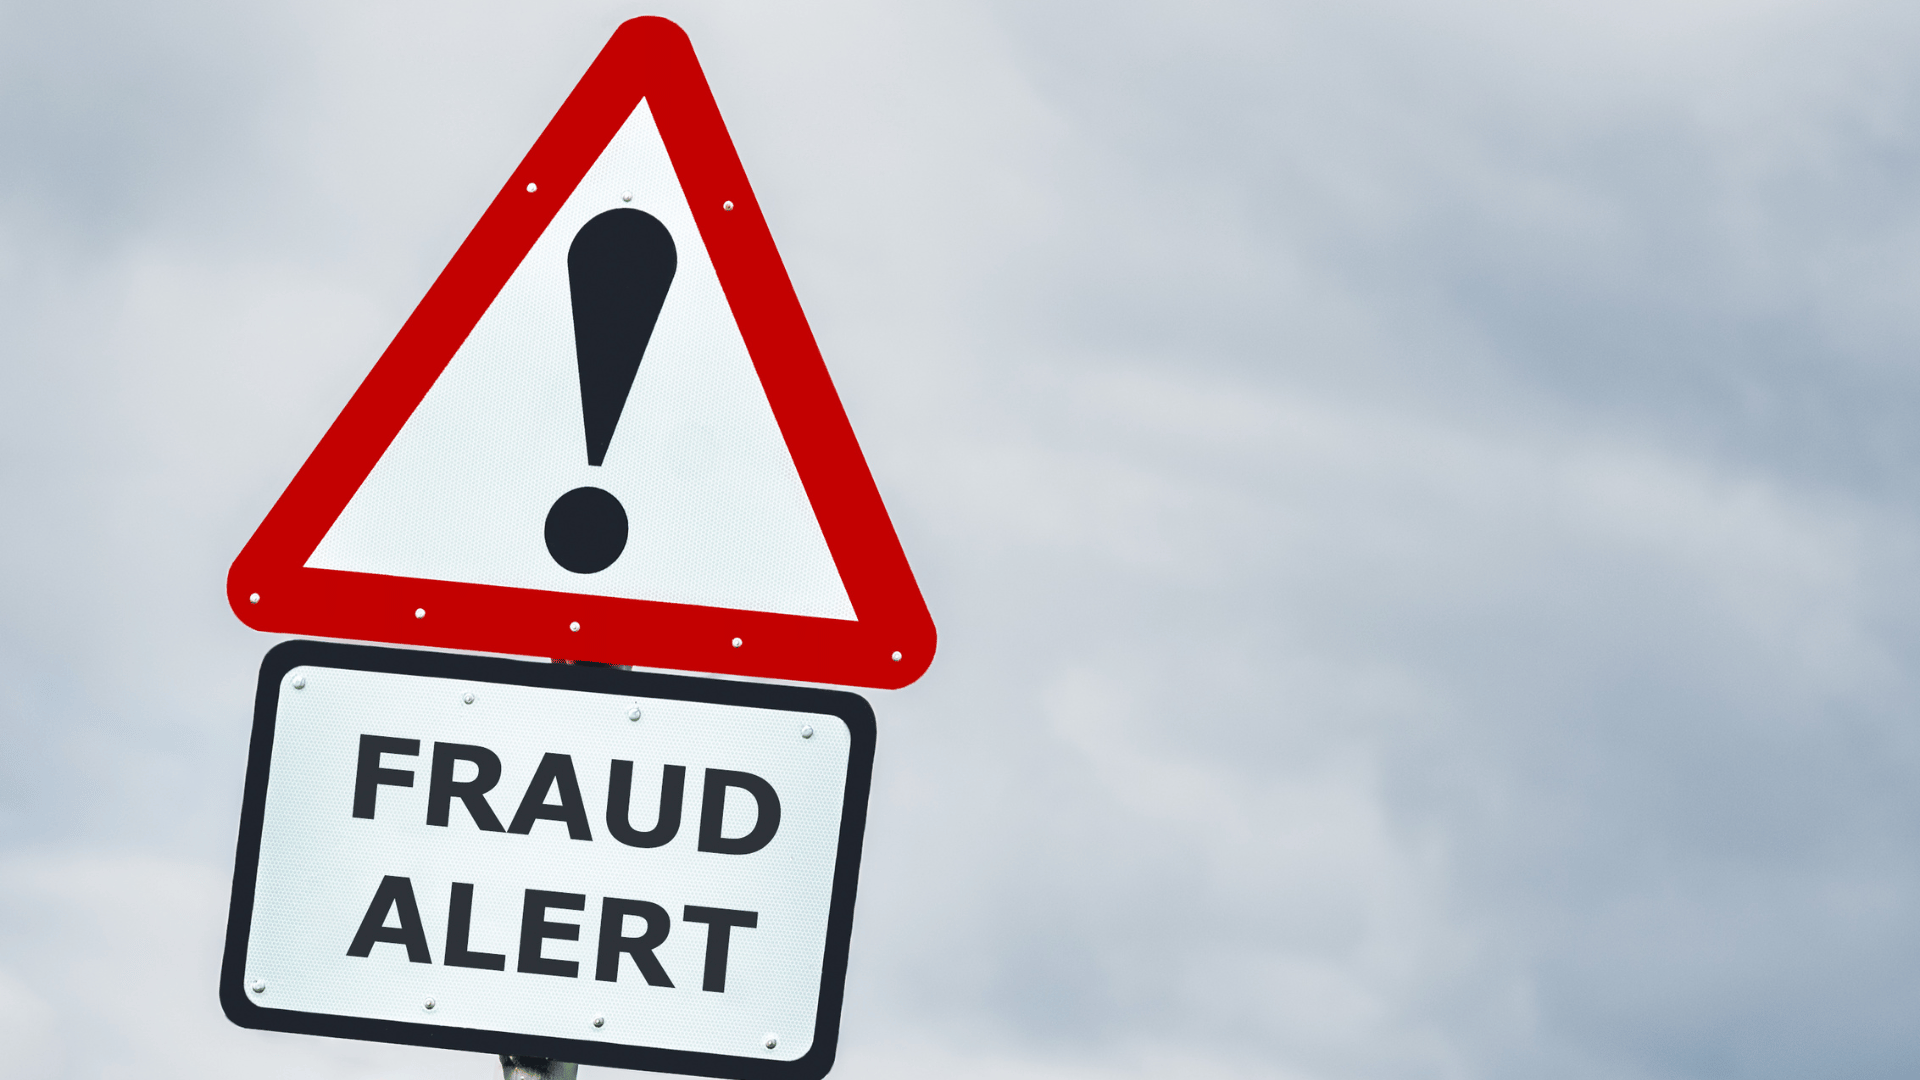 How to Report Private Insurance Fraud